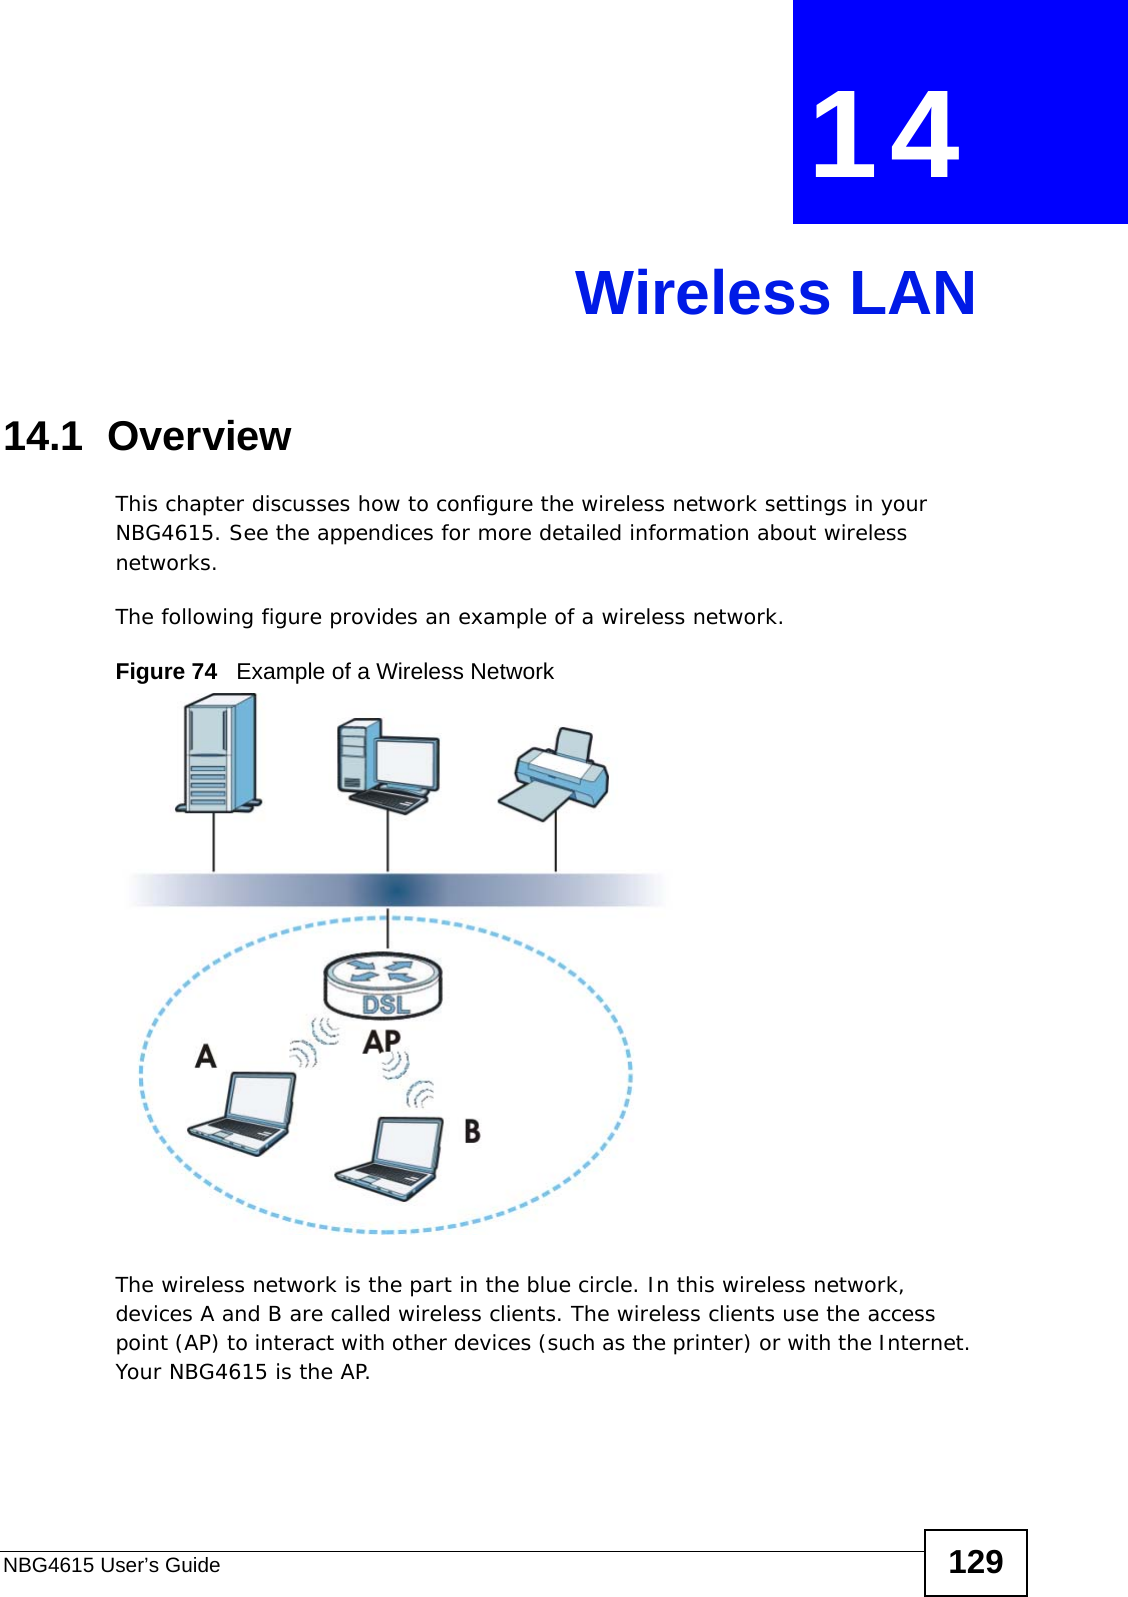 NBG4615 User’s Guide 129CHAPTER  14 Wireless LAN14.1  OverviewThis chapter discusses how to configure the wireless network settings in your NBG4615. See the appendices for more detailed information about wireless networks.The following figure provides an example of a wireless network.Figure 74   Example of a Wireless NetworkThe wireless network is the part in the blue circle. In this wireless network, devices A and B are called wireless clients. The wireless clients use the access point (AP) to interact with other devices (such as the printer) or with the Internet. Your NBG4615 is the AP.